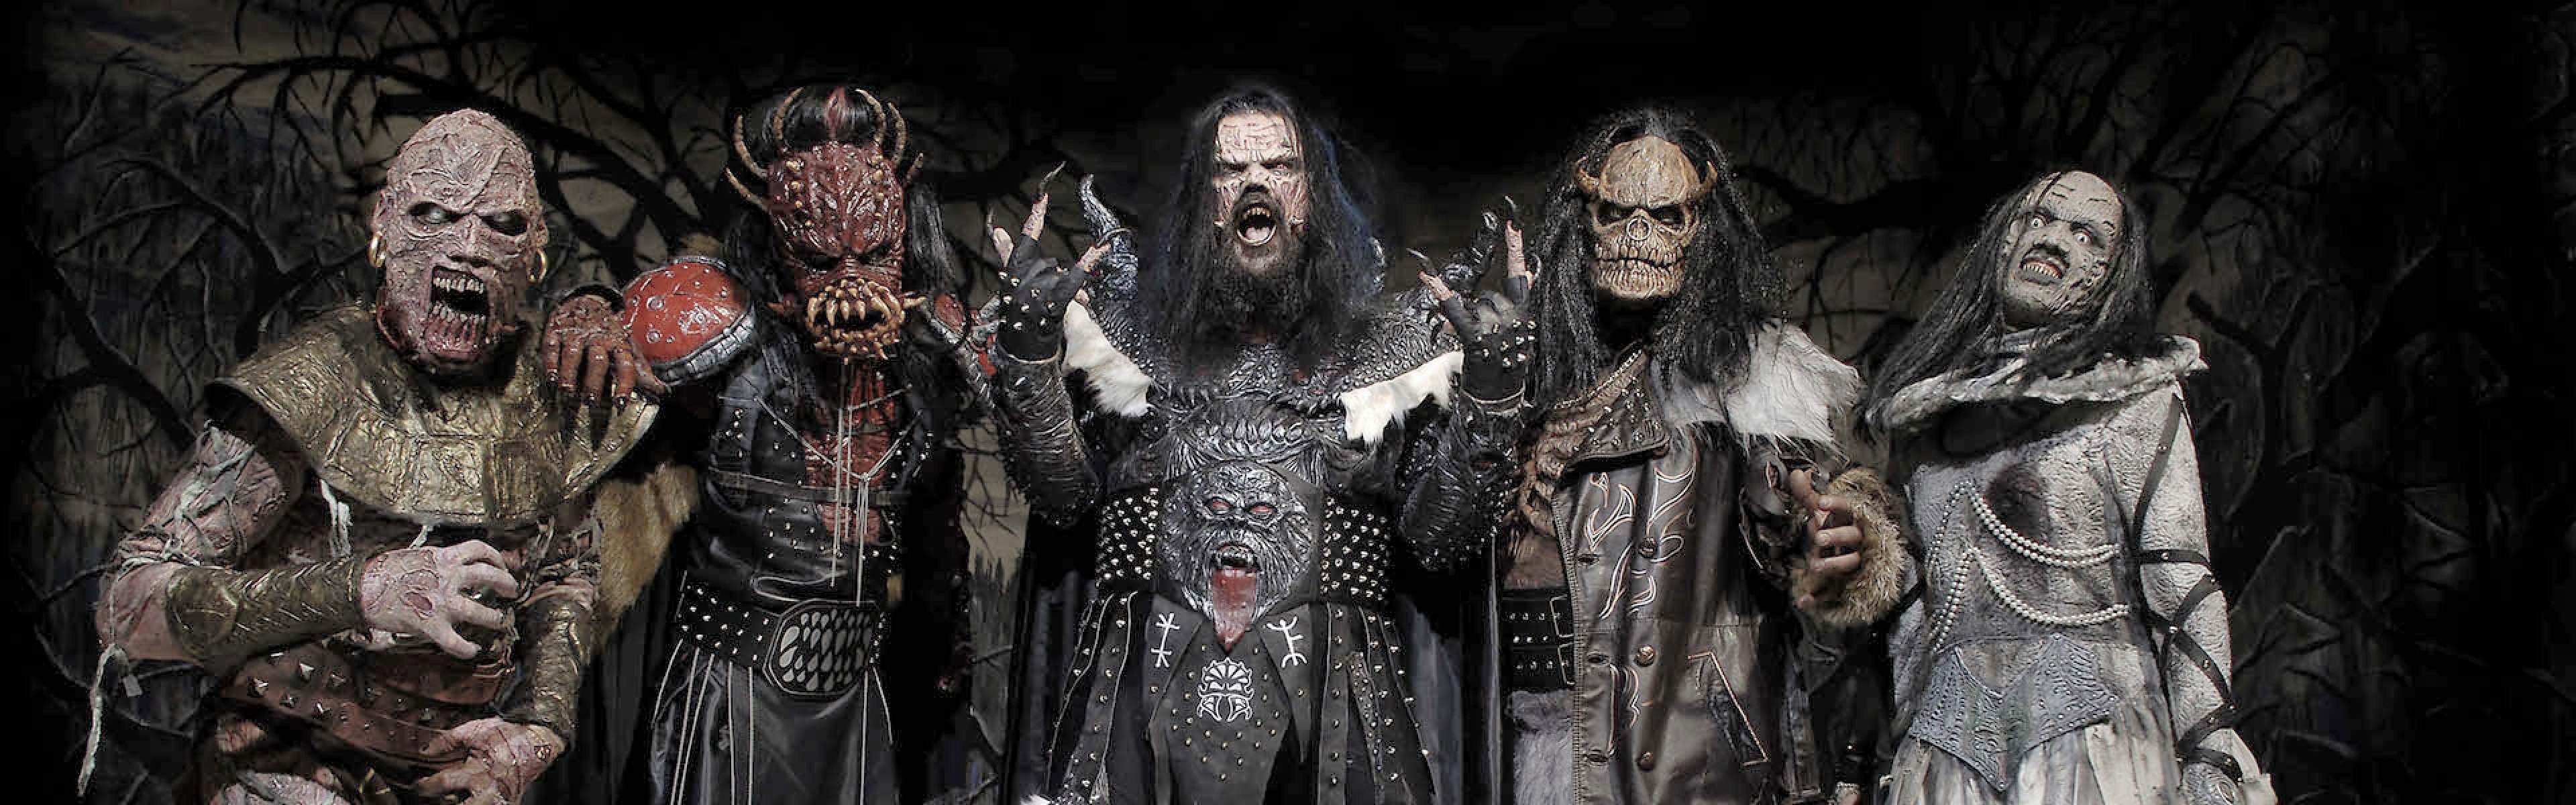 Lordi Wallpapers High Quality | Download Free